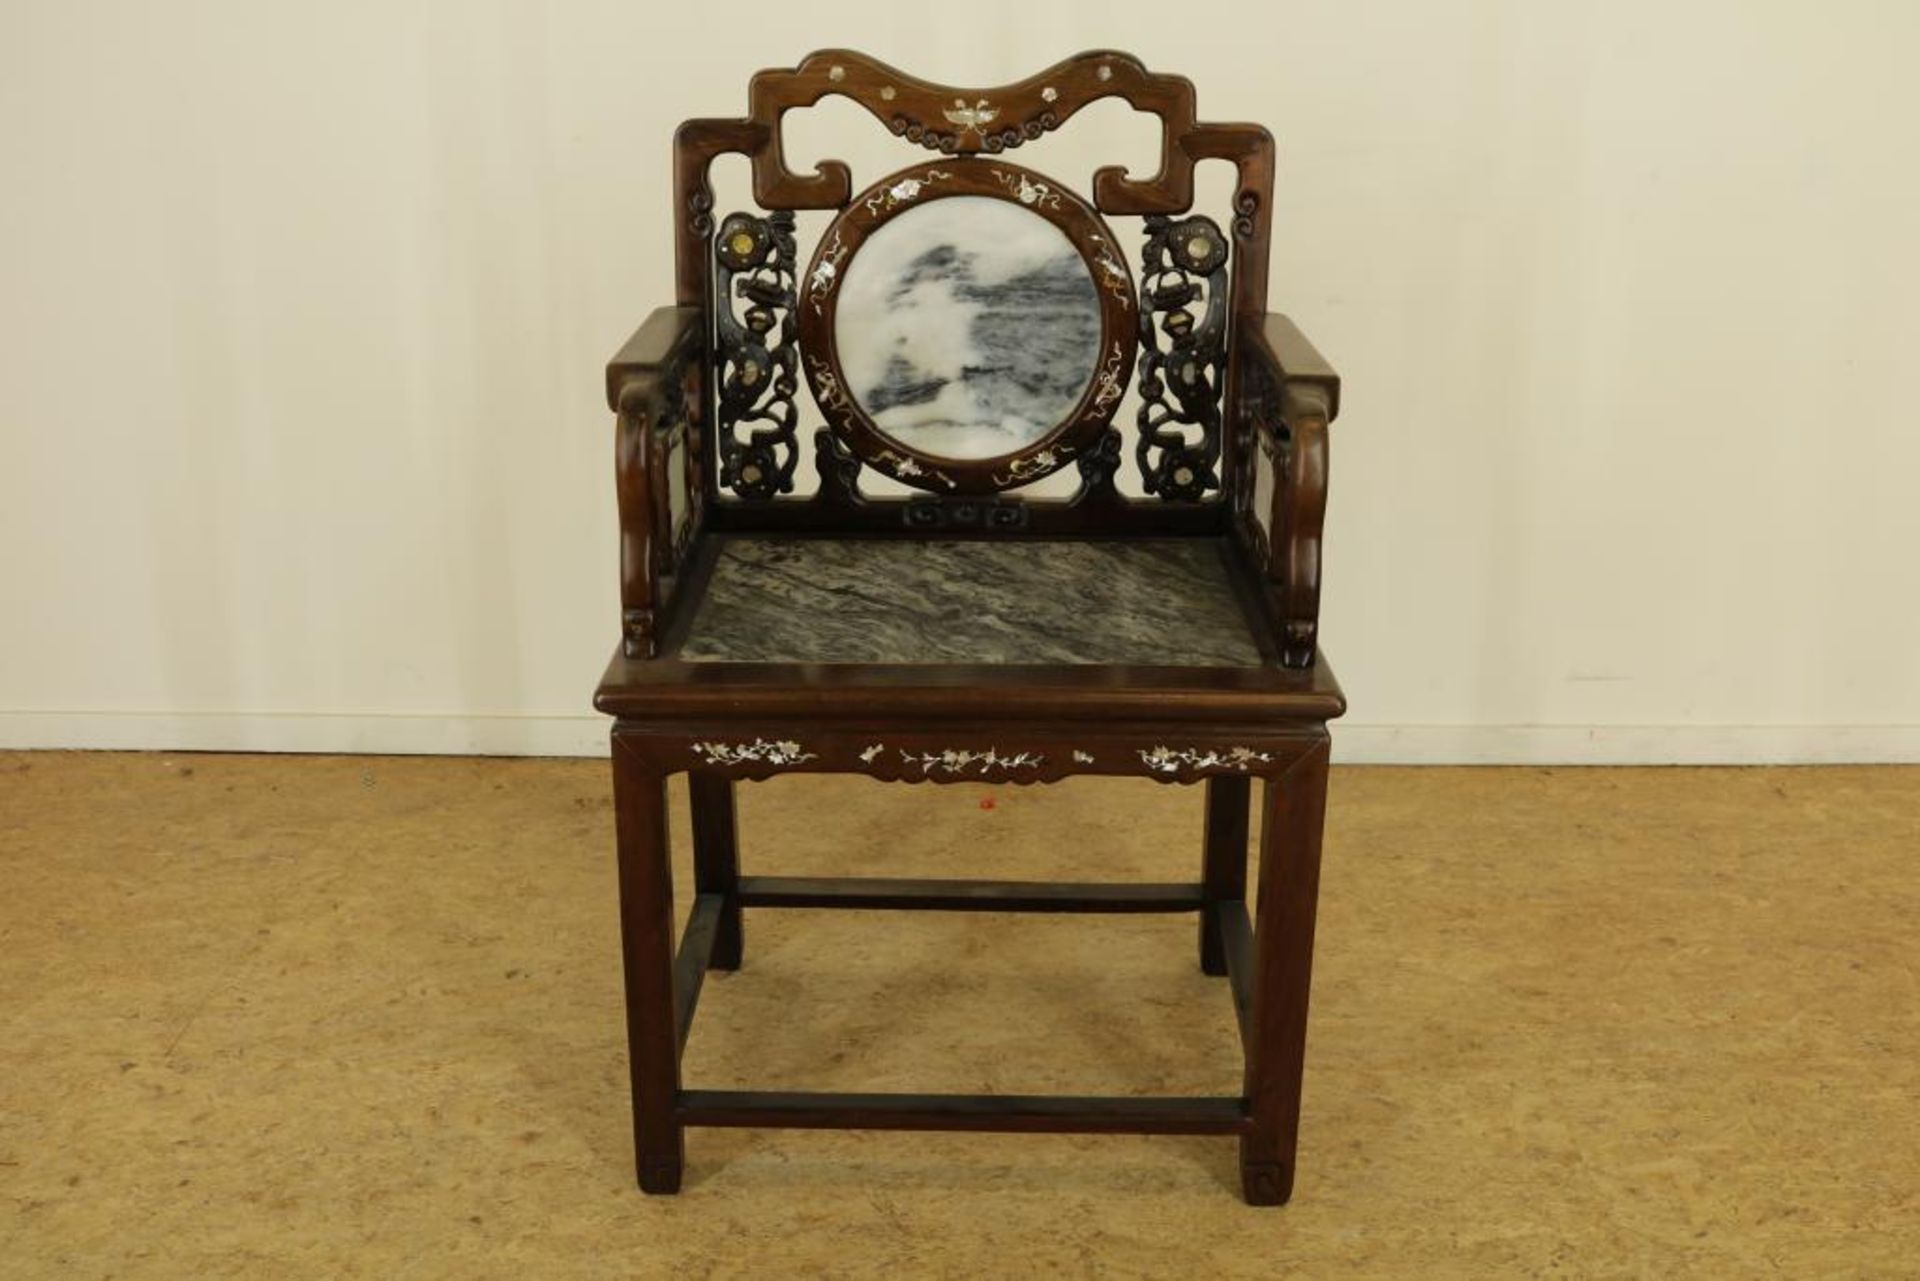 Wooden chinese chair with marble and mother of pearl inlay, China 20th century. (marble restored)